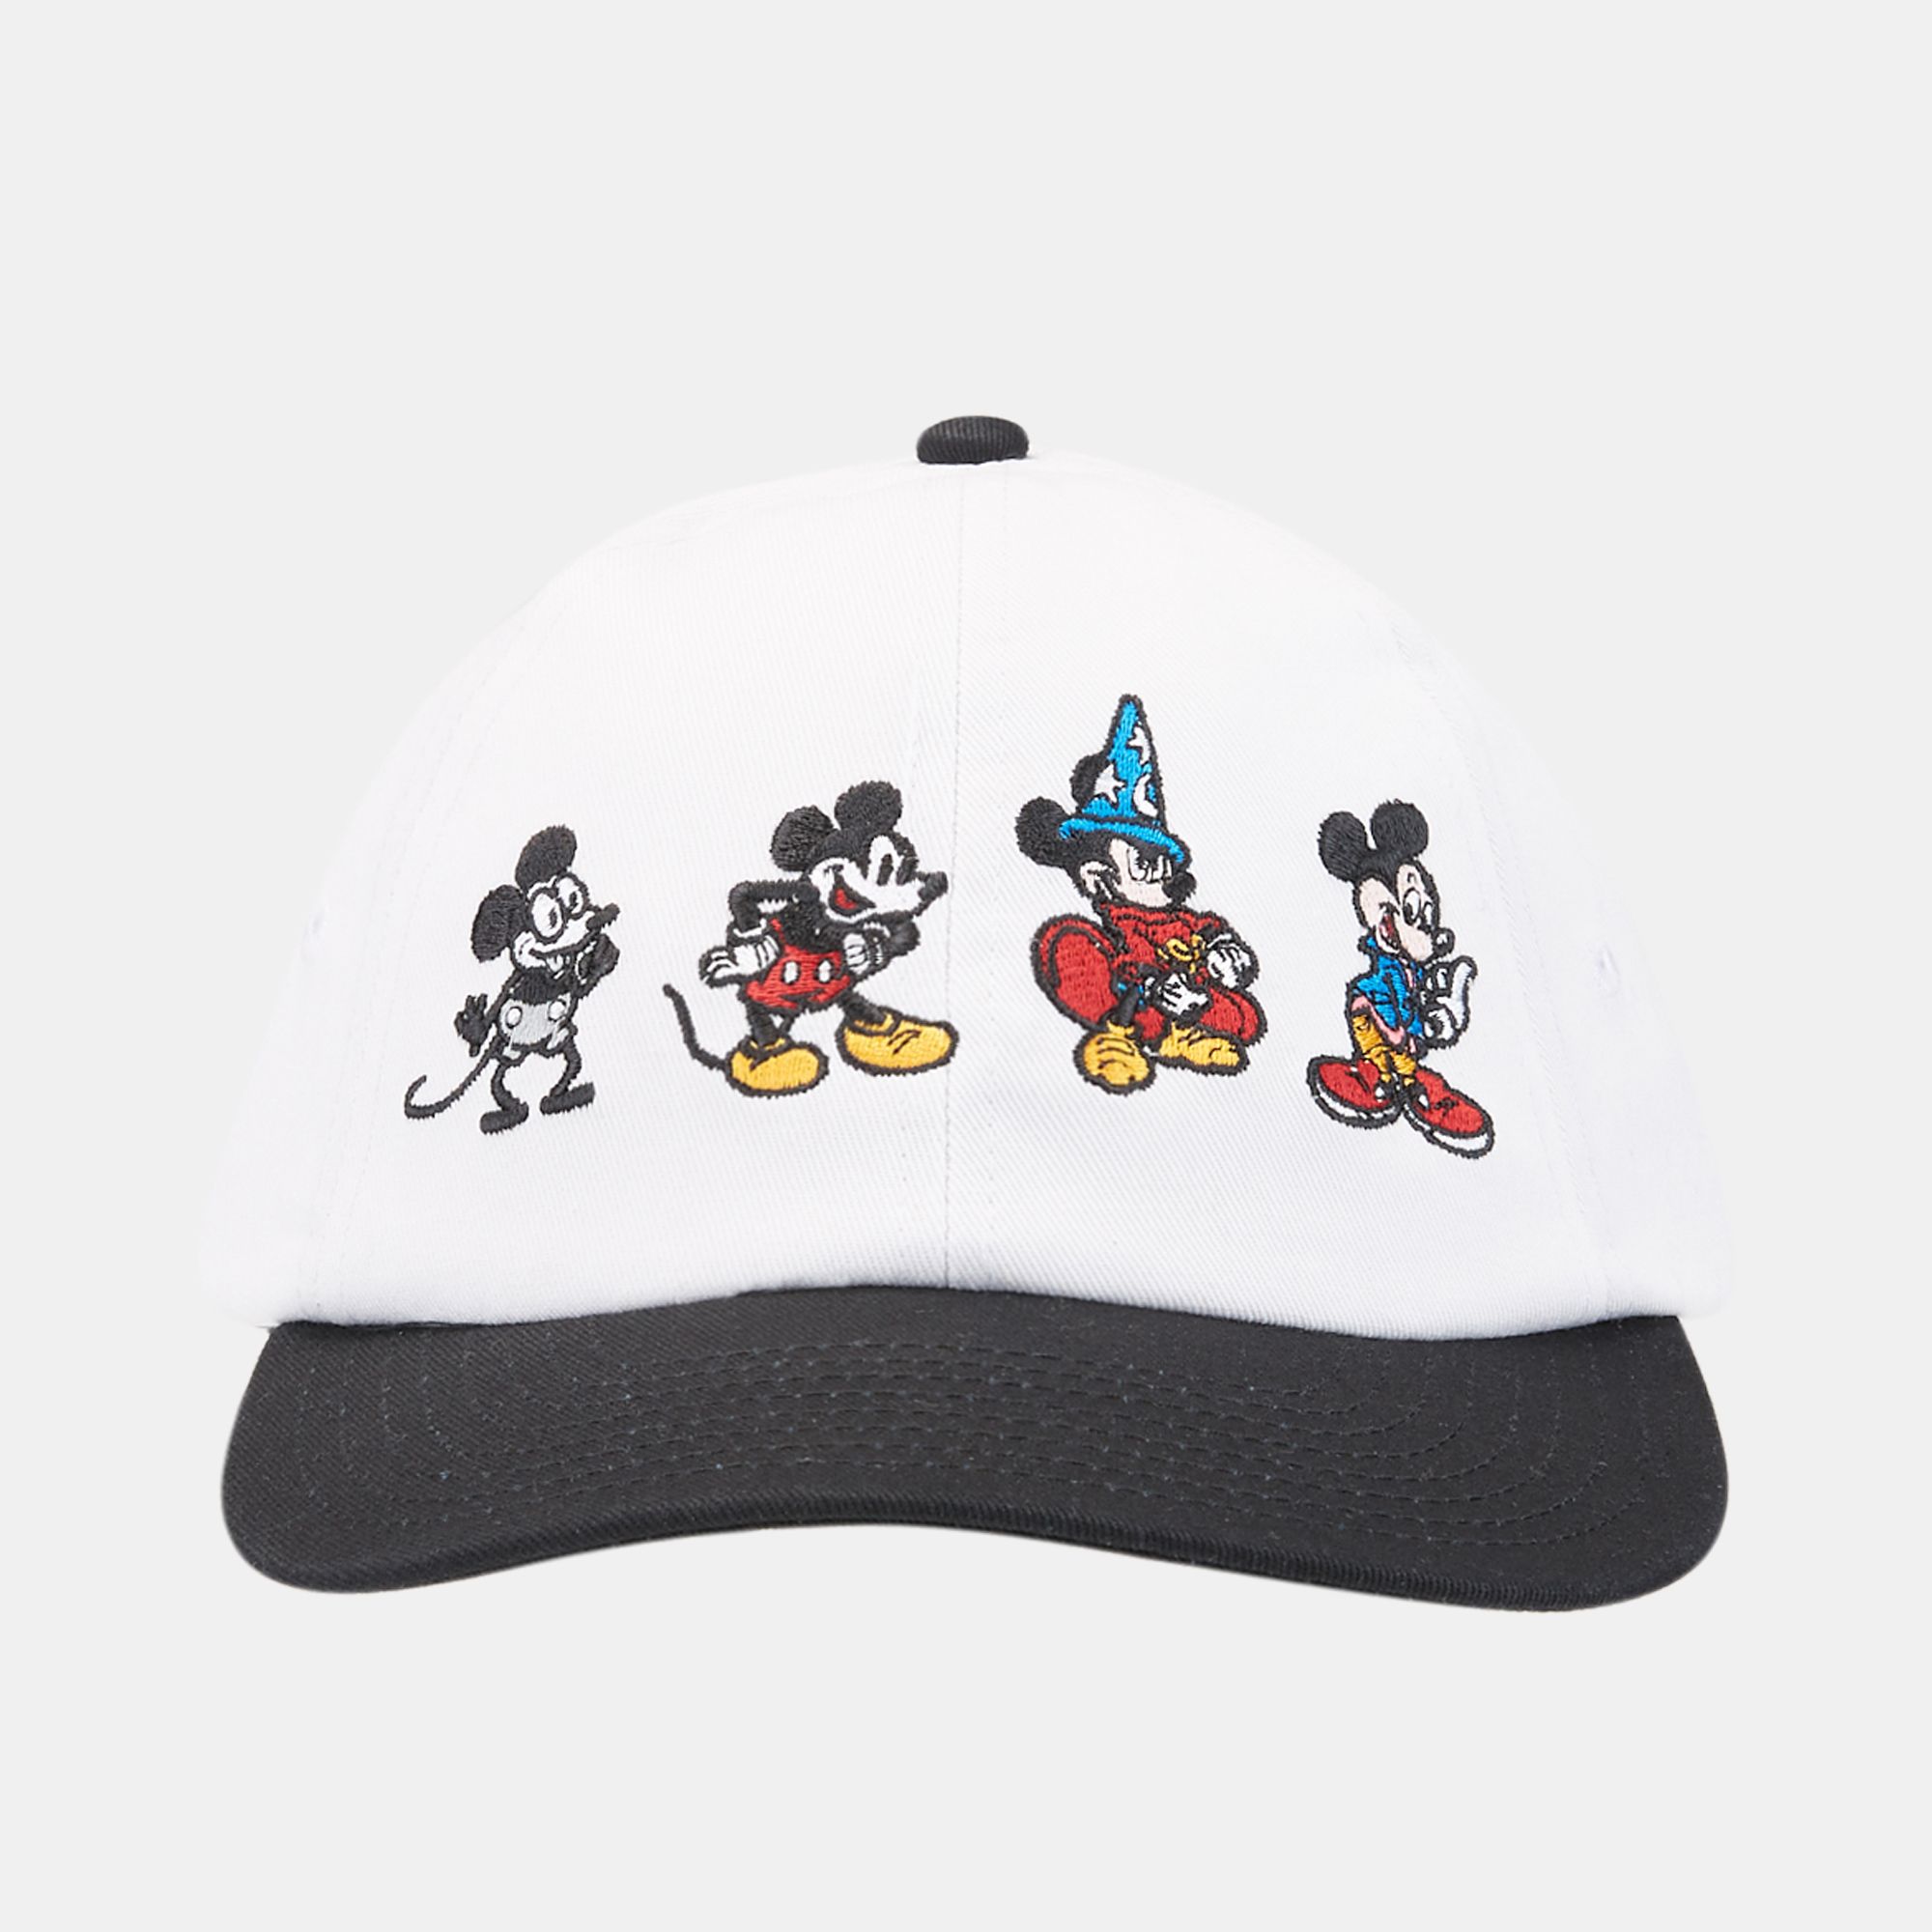 vans mickey mouse hat